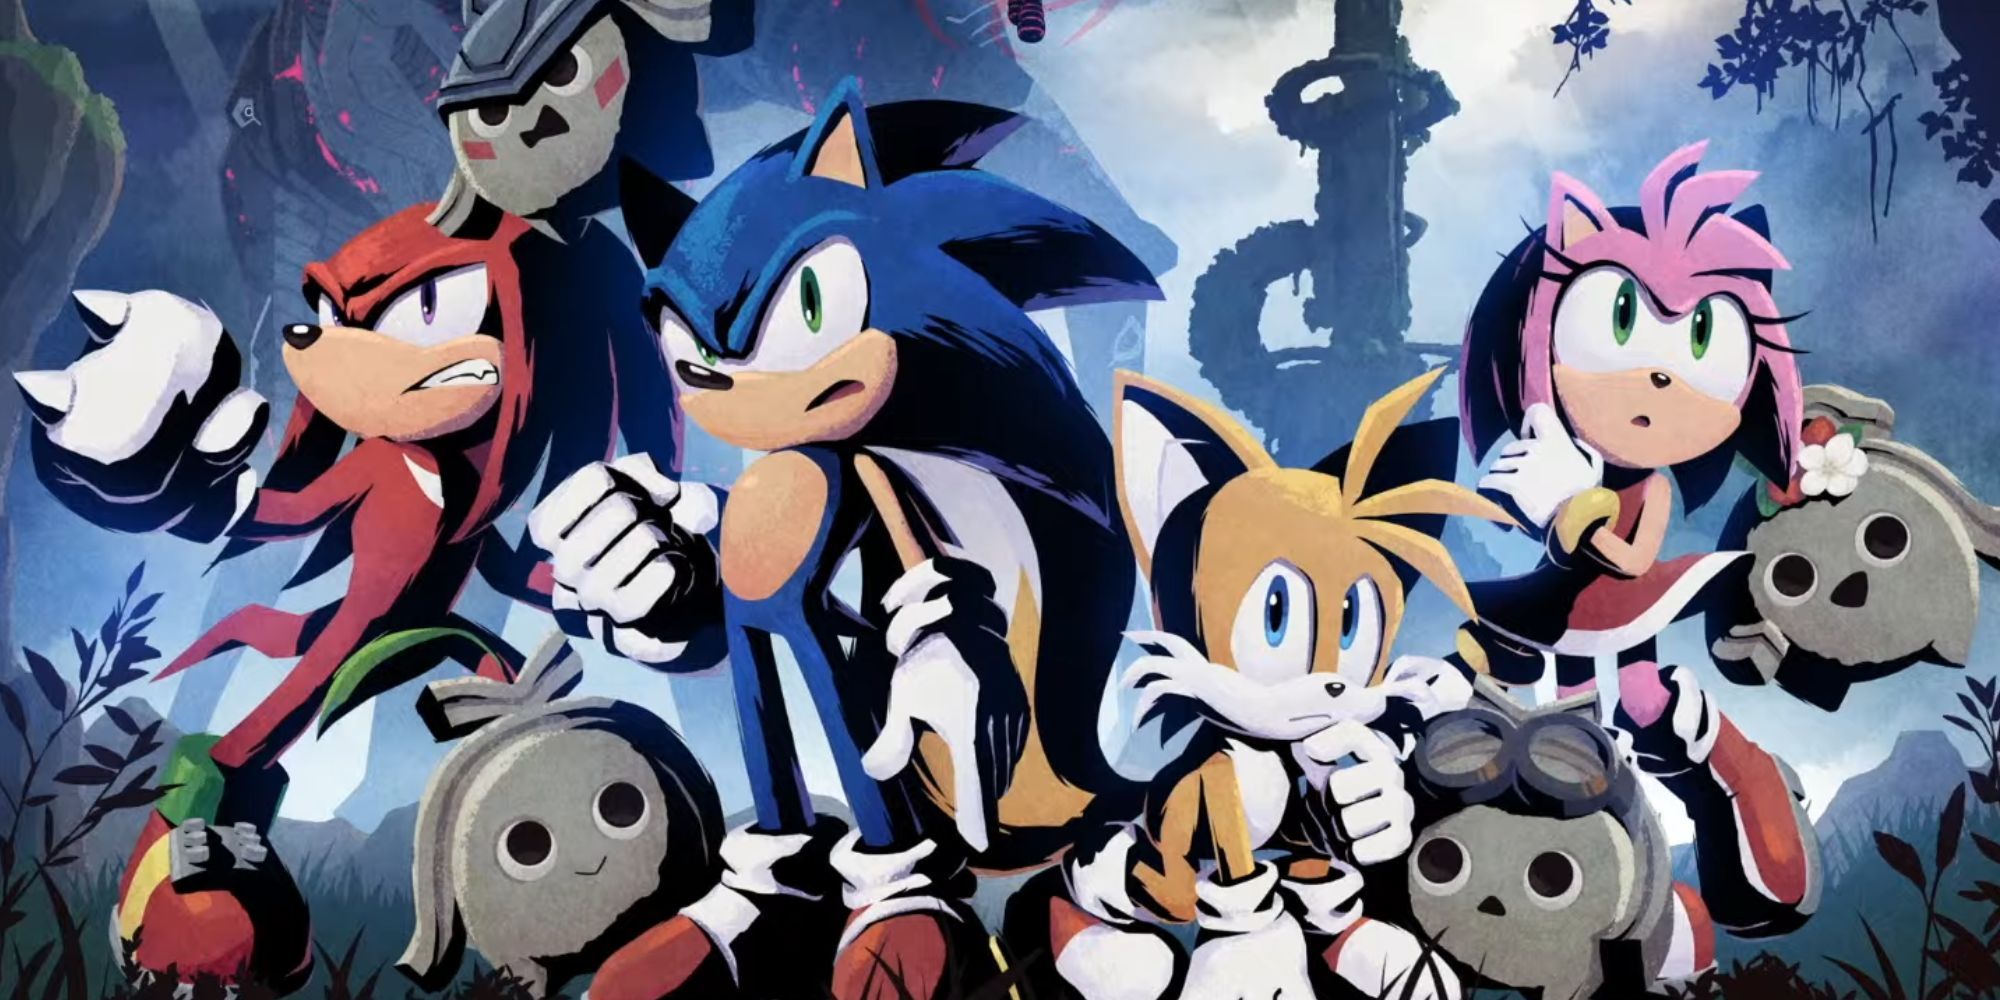 Sonic, Tails, Amy and Knuckles assess the danger alongside Kocos.